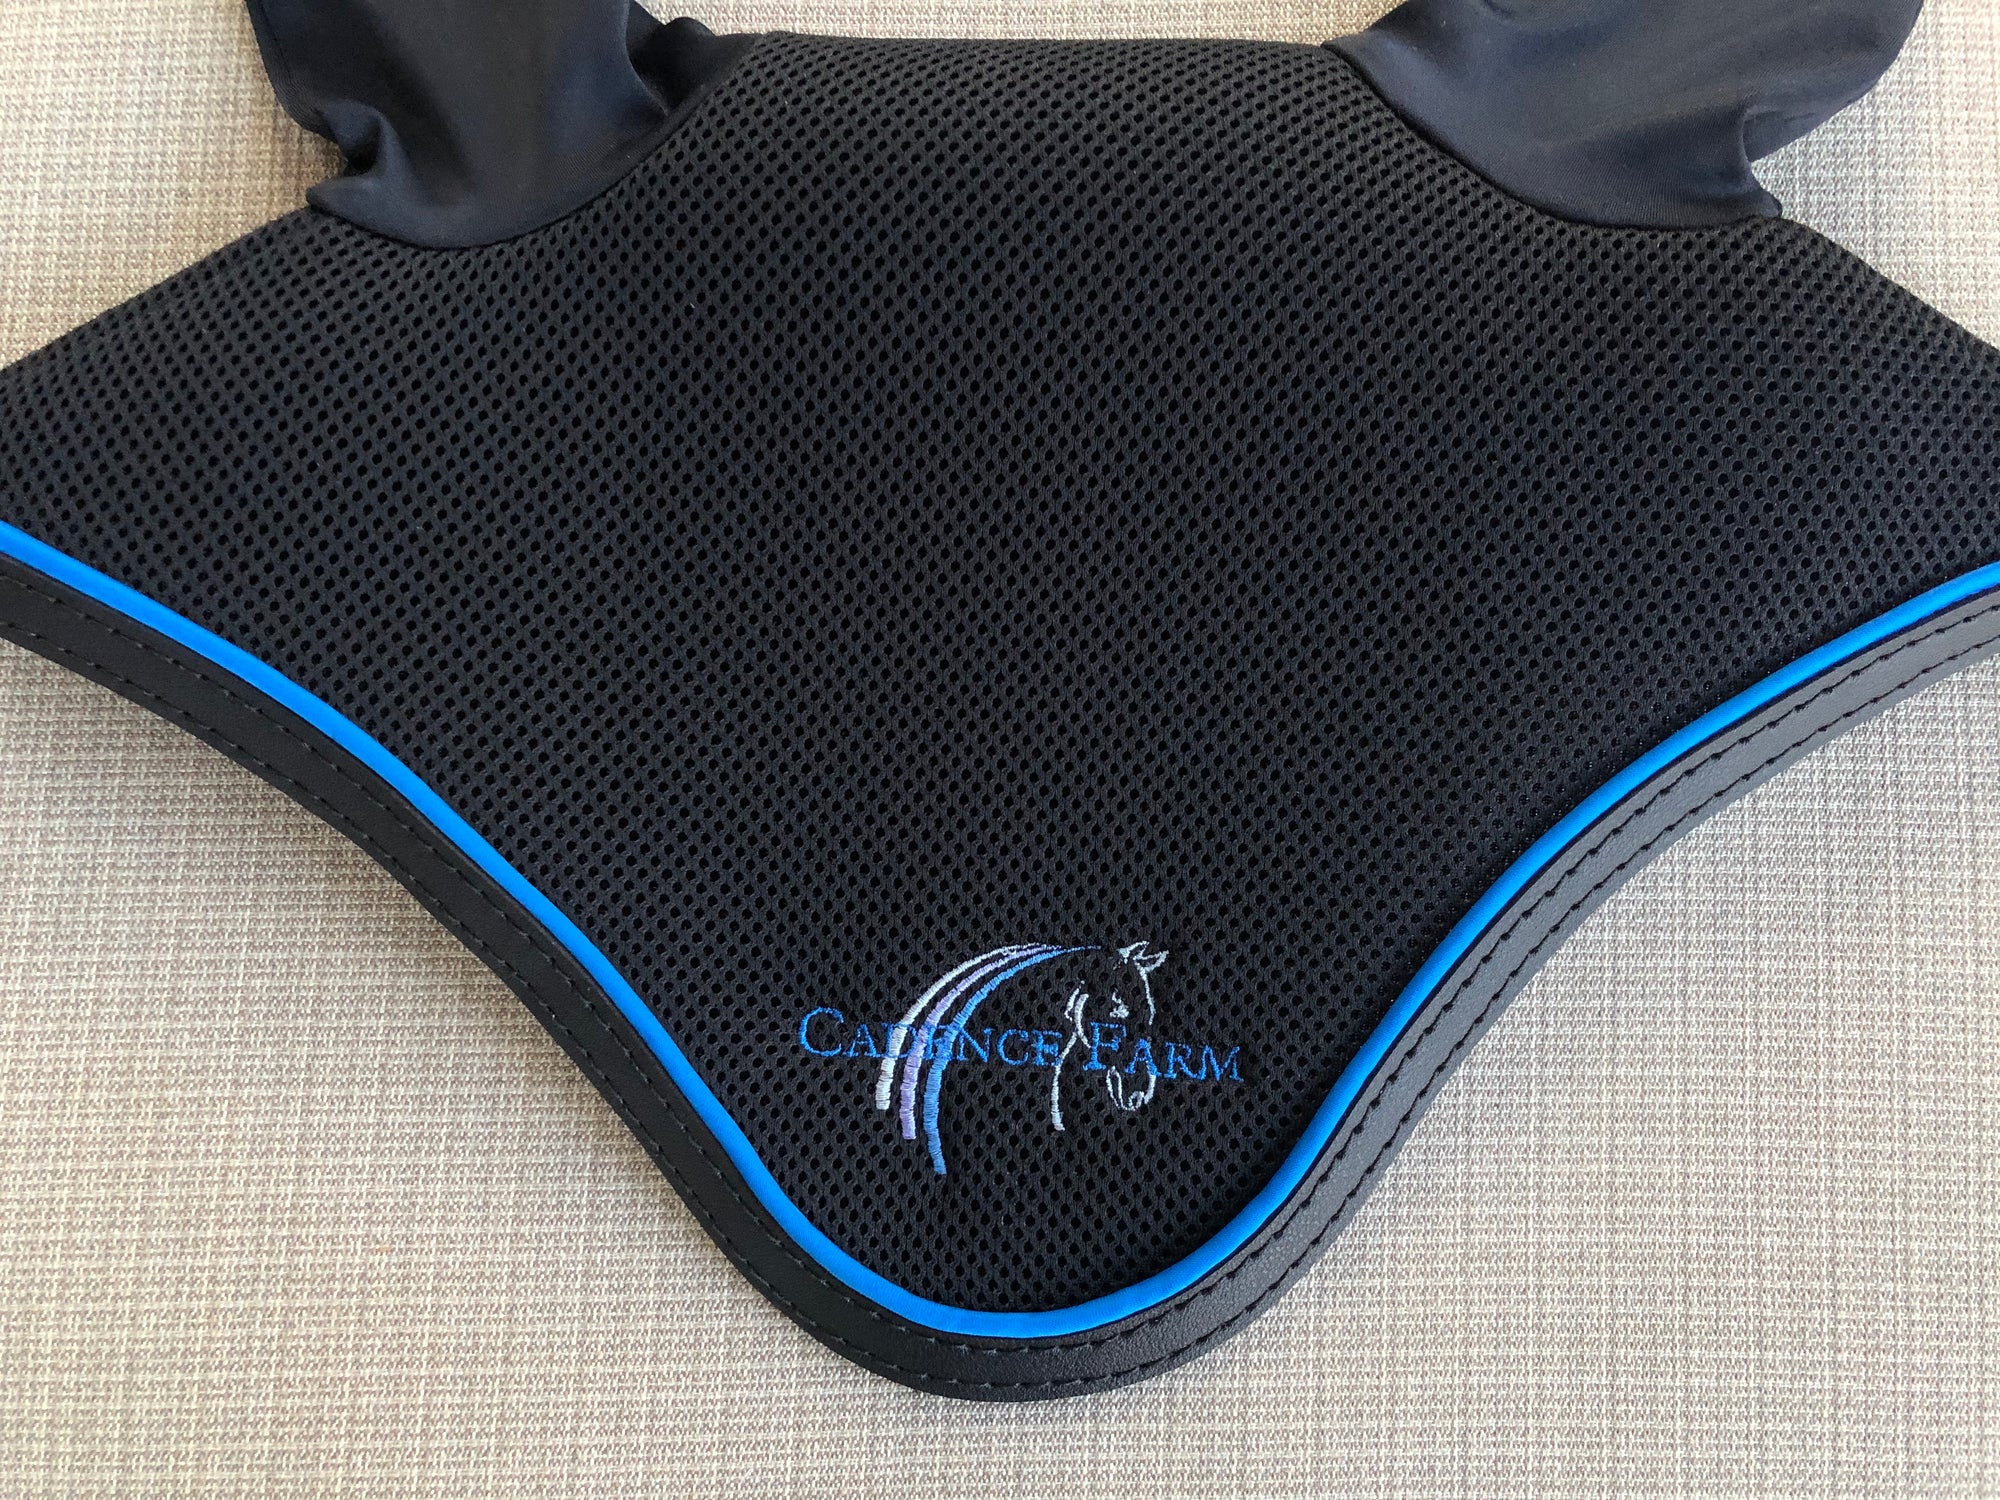 Black Round Bonnet with Blue Piping and Embroidery